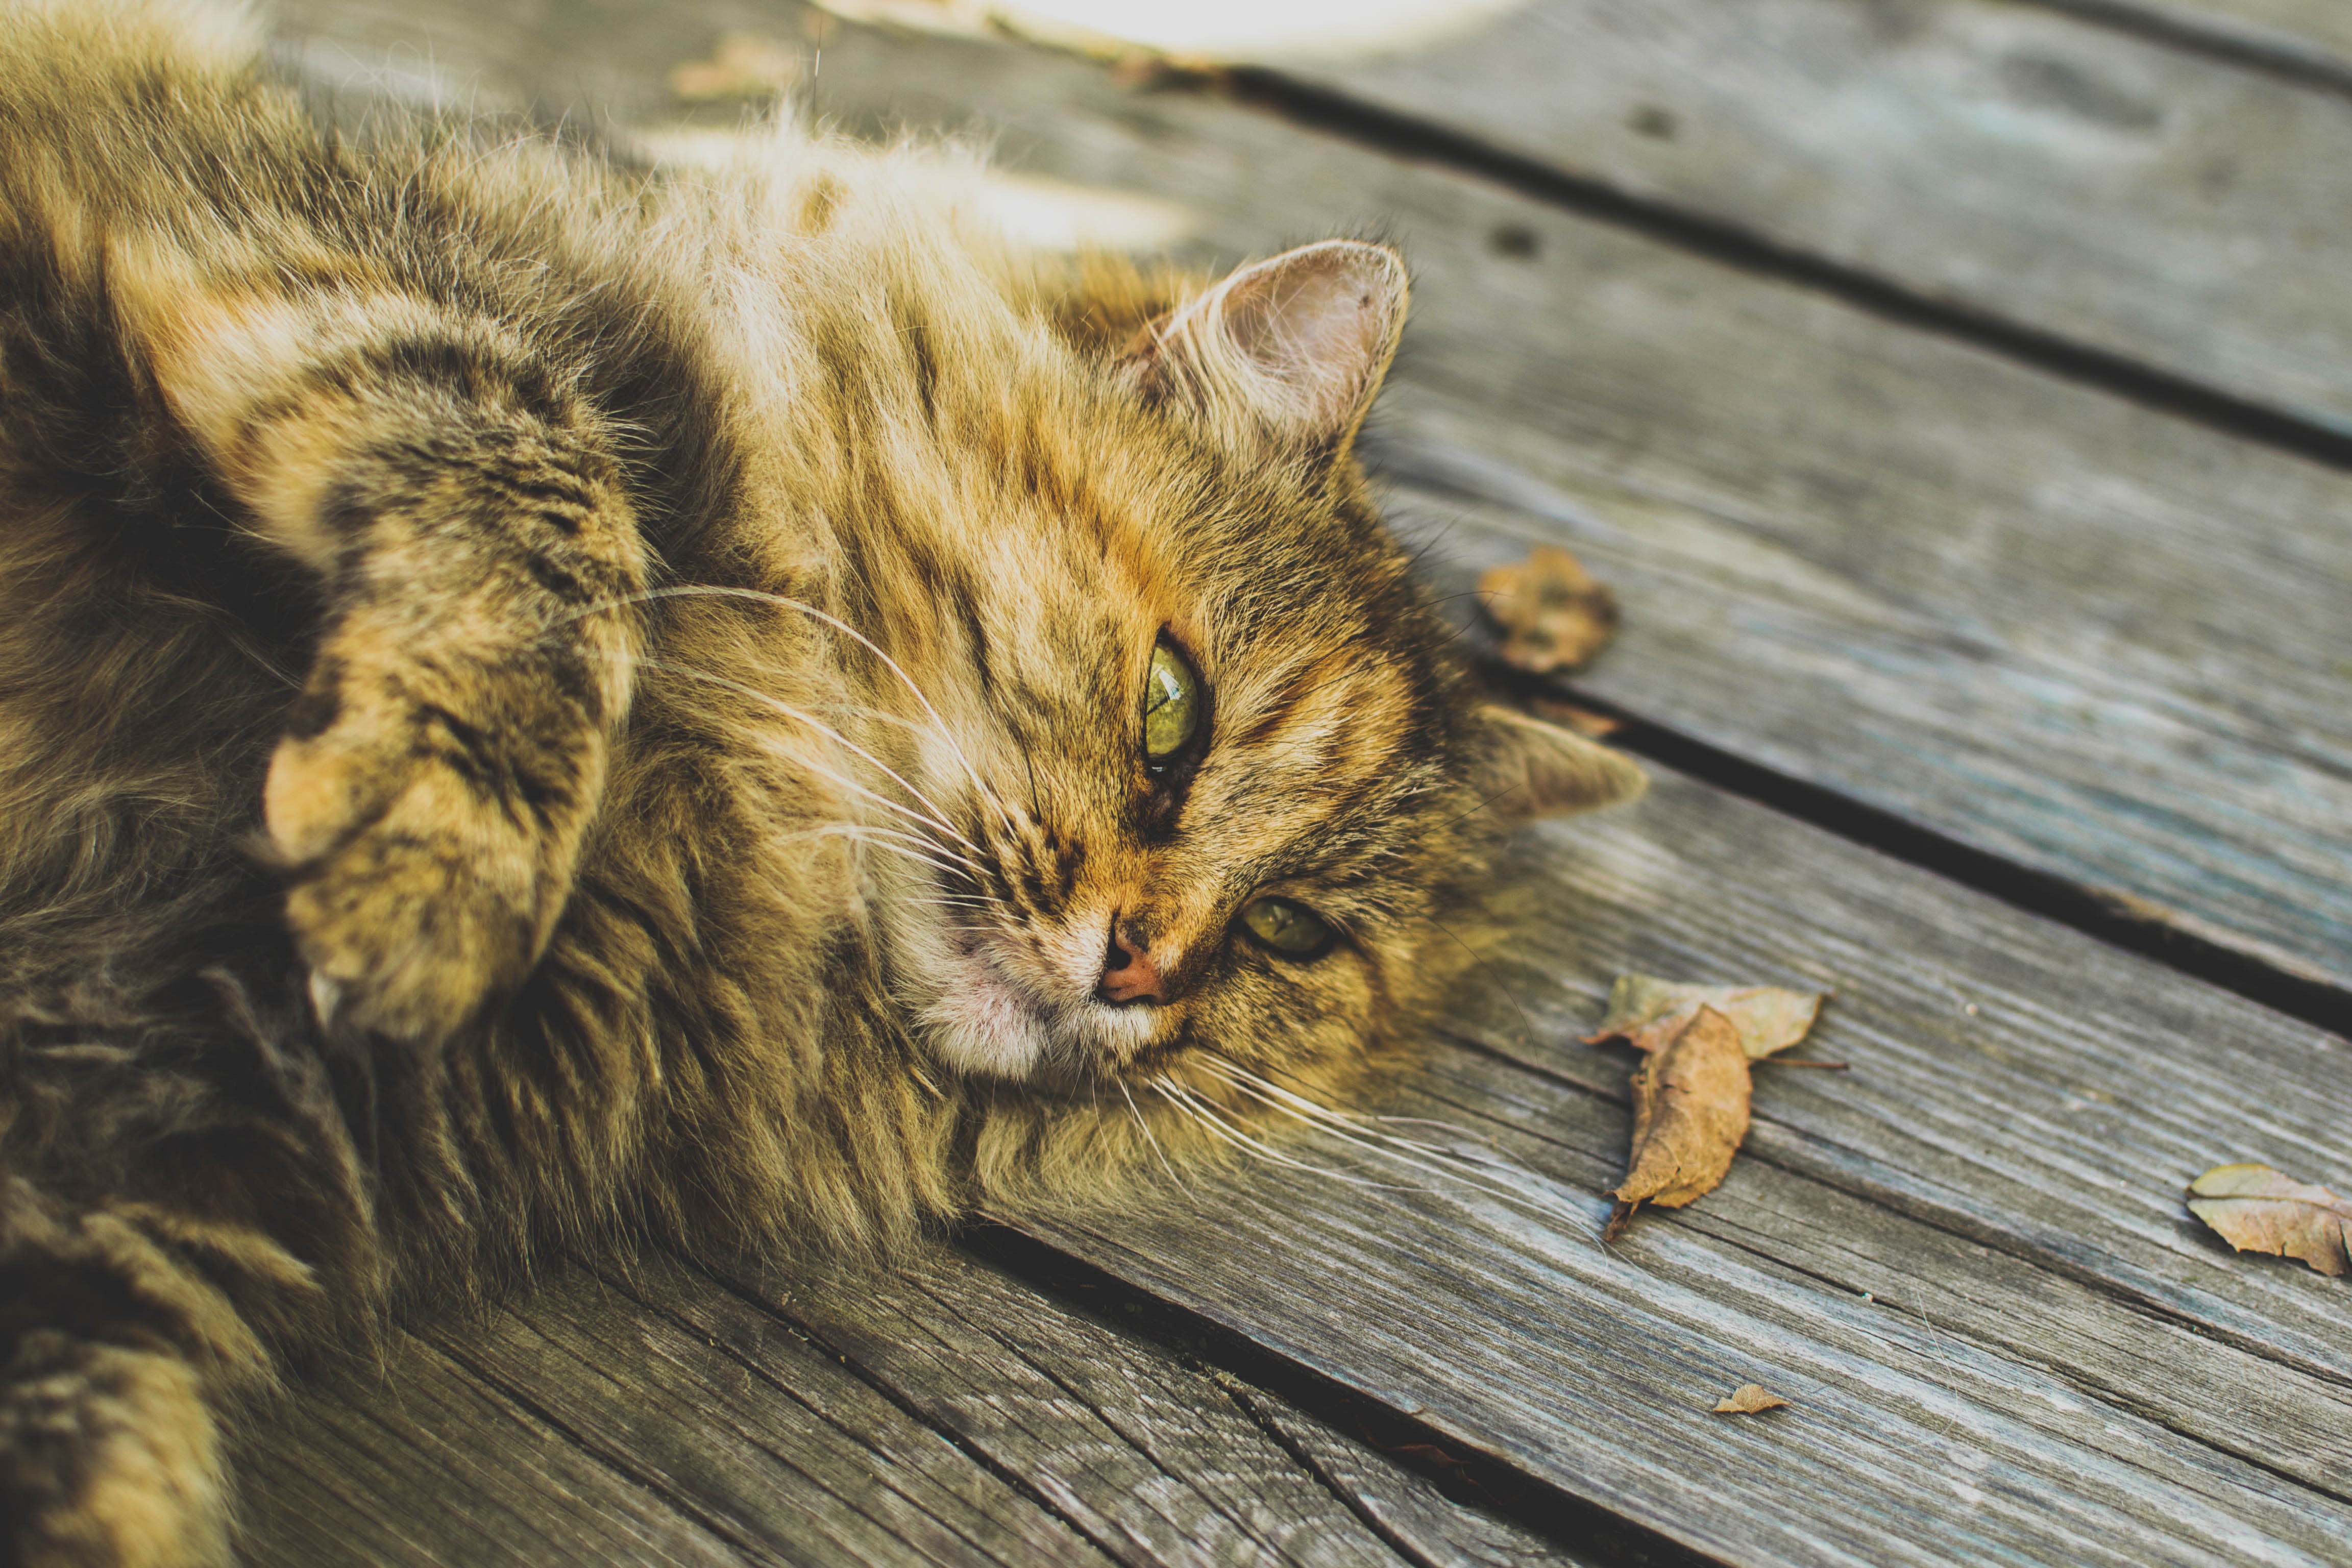 Shady Summer Snoozing: How to Keep Your Cat Happy in the Heat